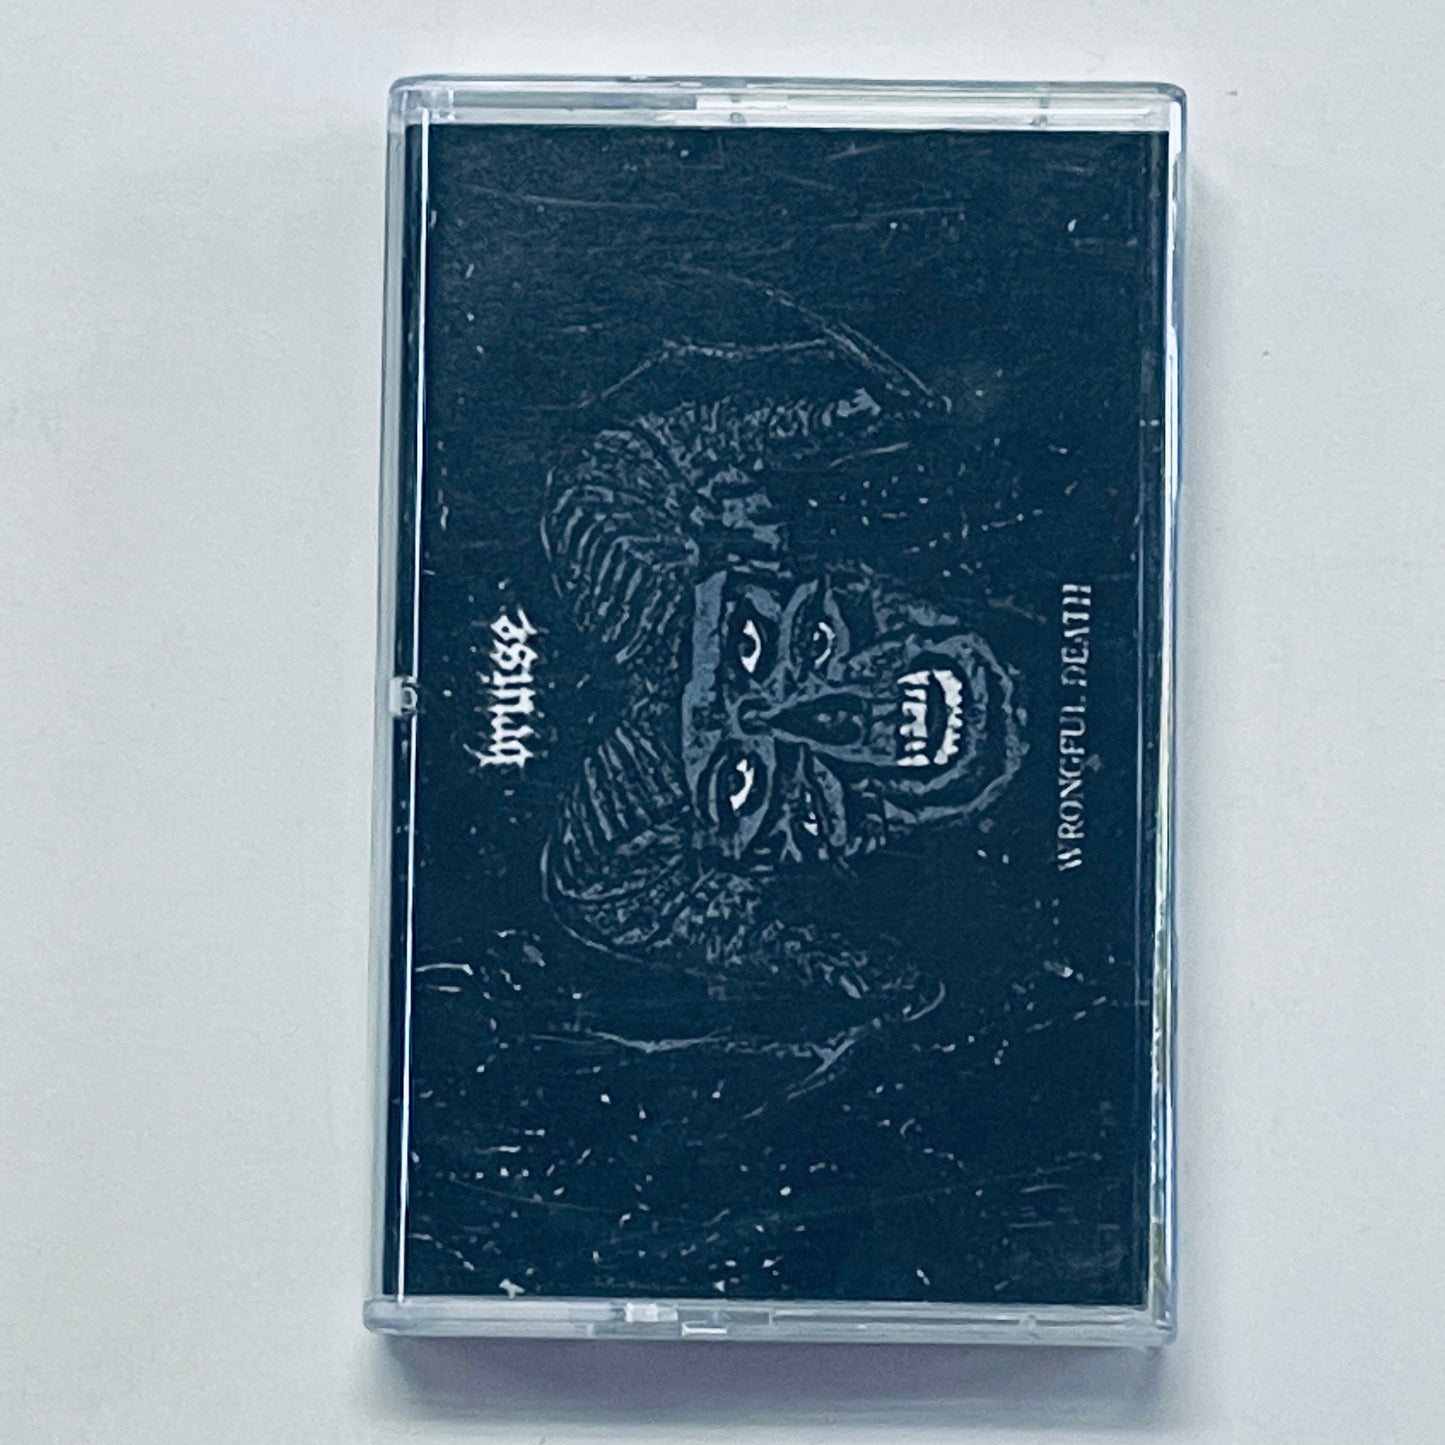 Bruise – Wrongful Death cassette tape (used)